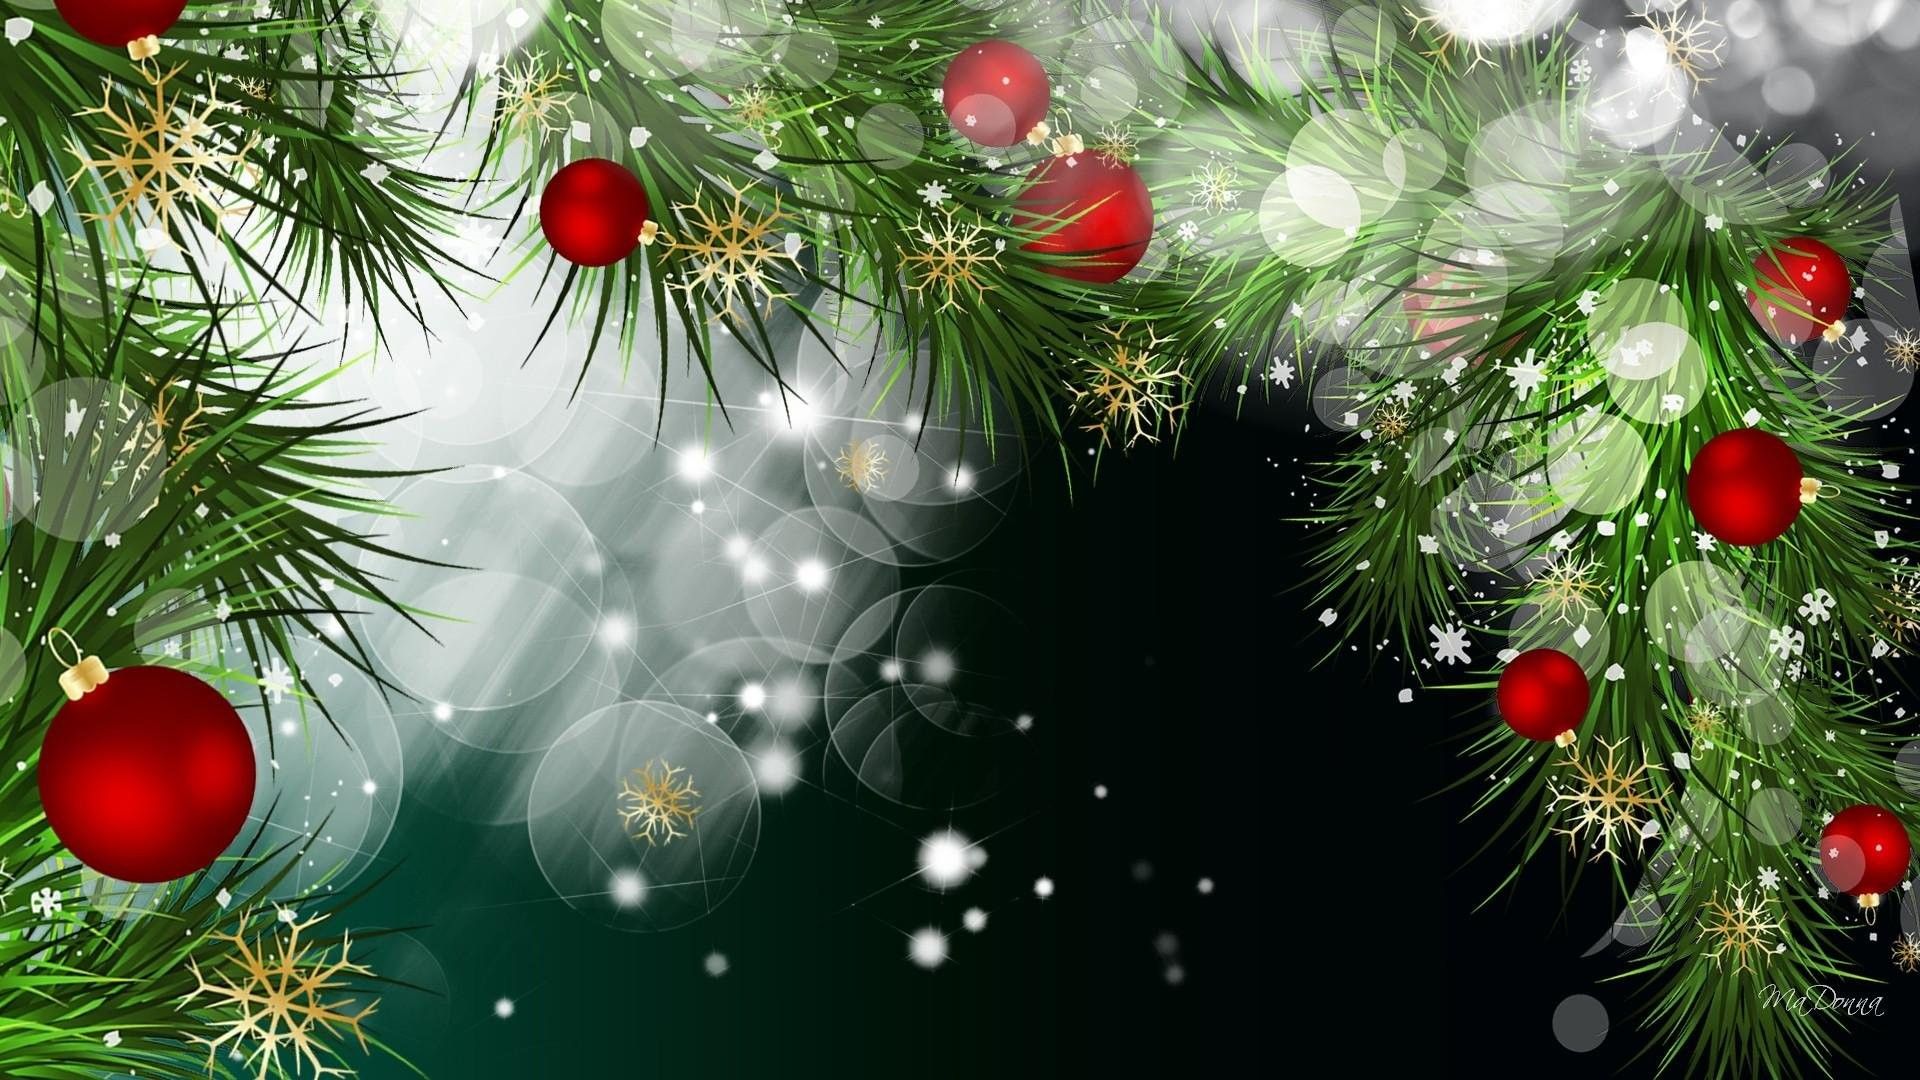 Green Christmas Wallpaper Images Browse 530030 Stock Photos  Vectors  Free Download with Trial  Shutterstock